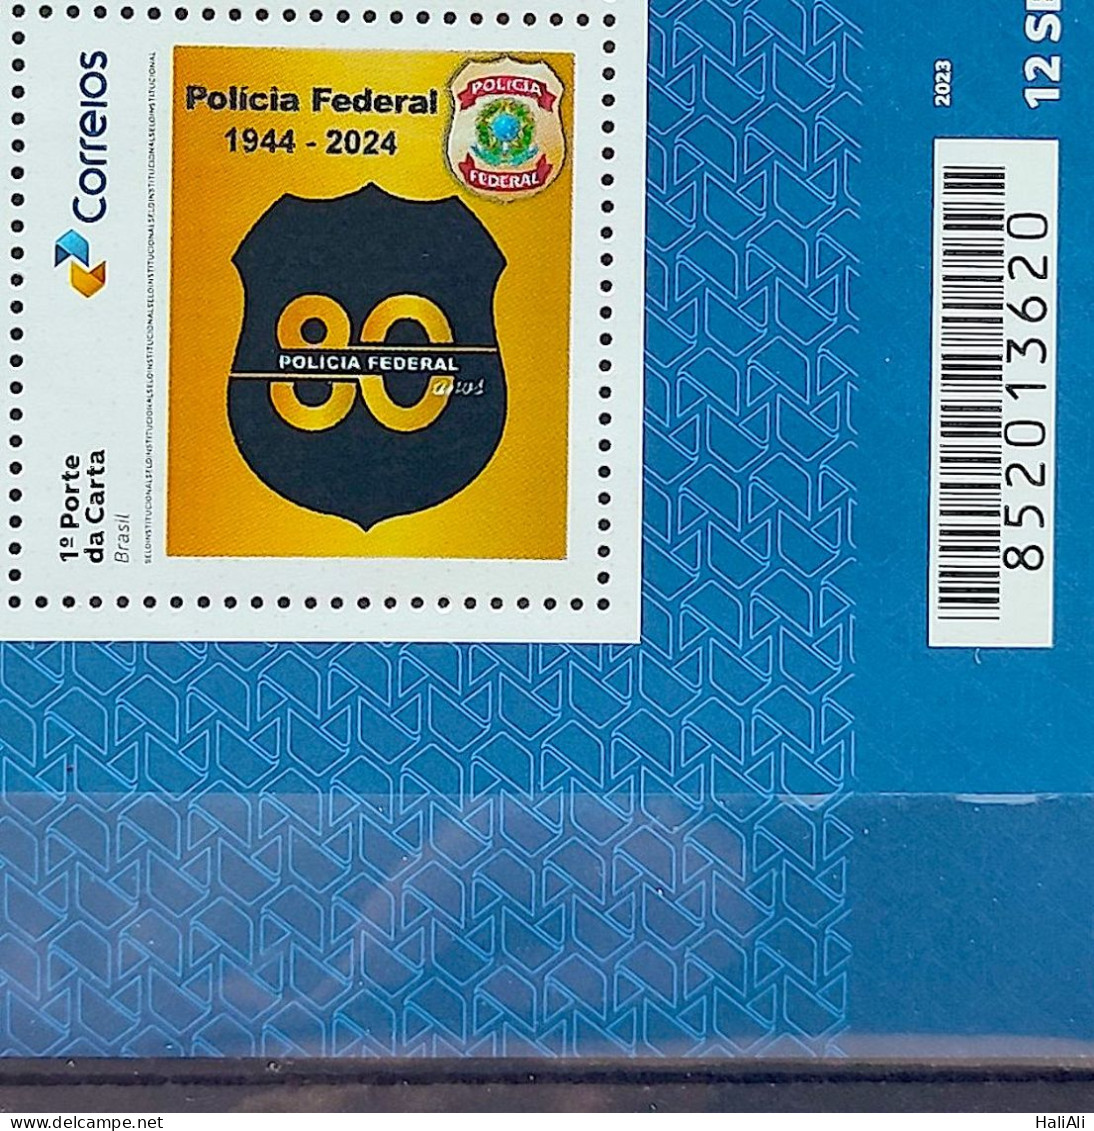 SI 21 Brazil Institutional Stamp 80 Years Federal Military Police 2024 Bar Code - Sellos Personalizados